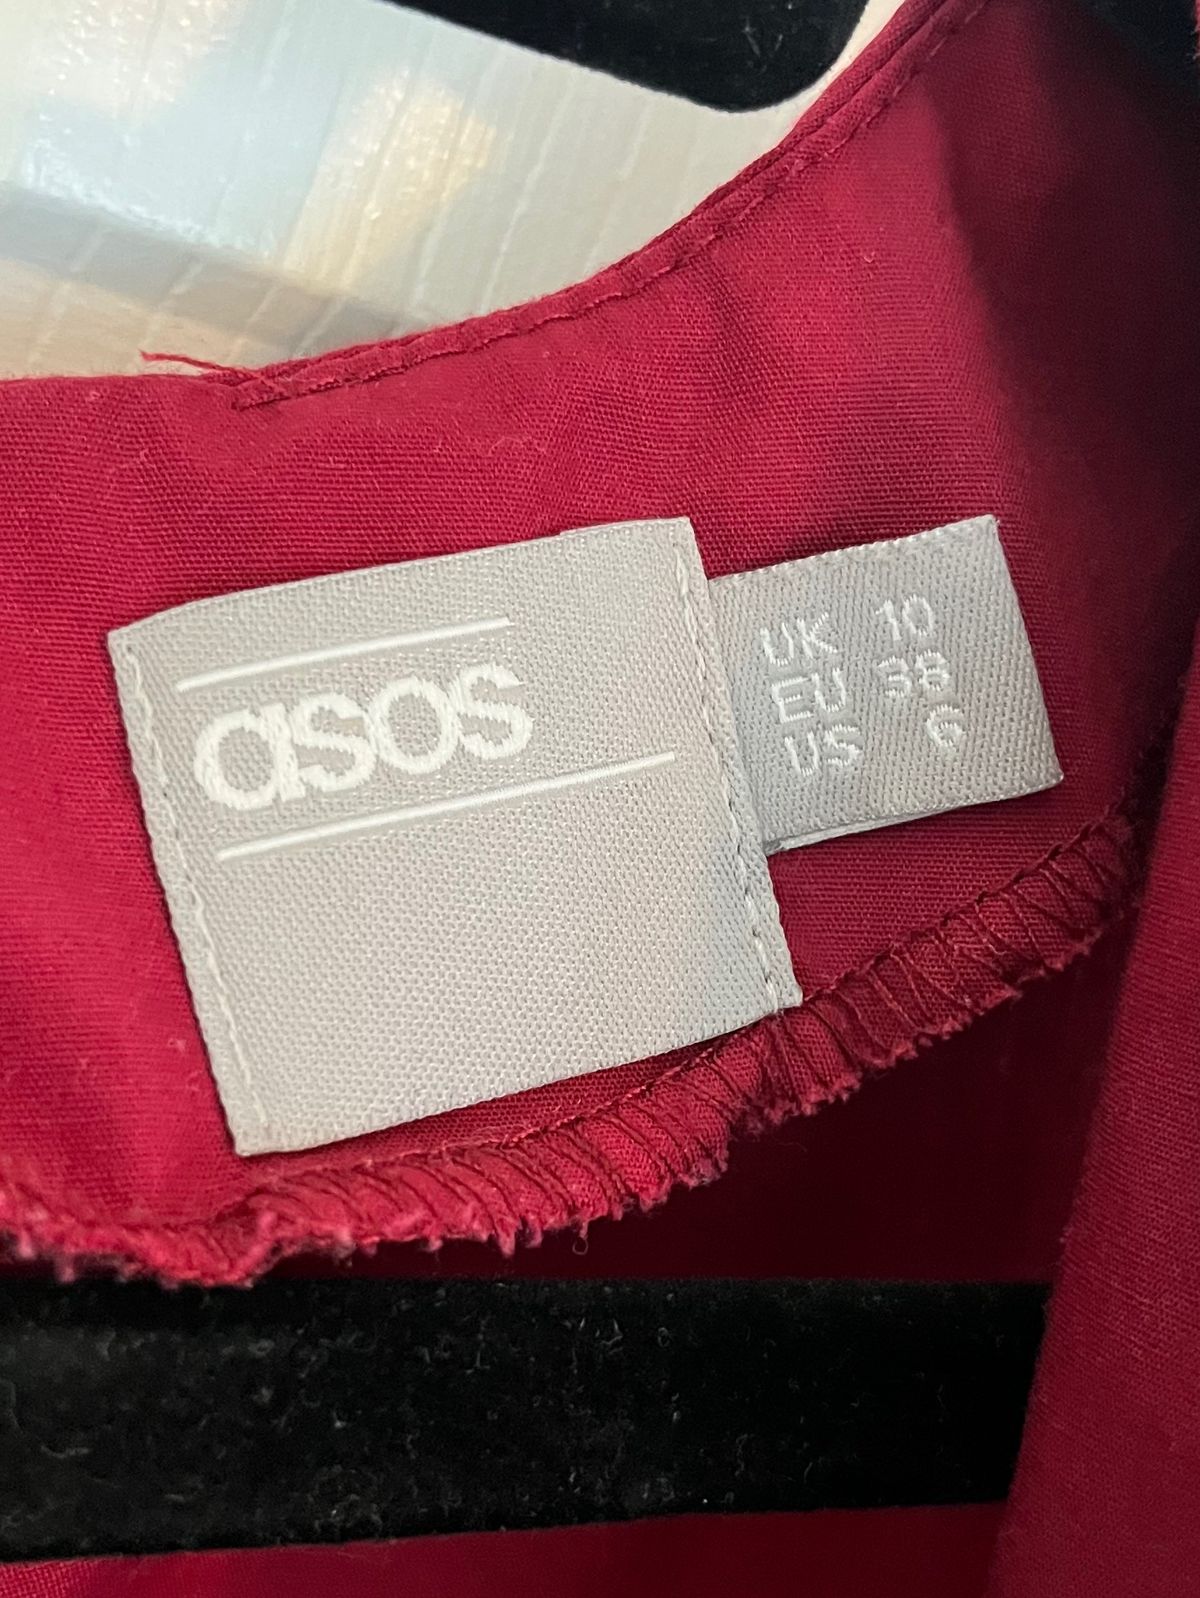 ASOS Size 6 Long Sleeve Red Cocktail Dress on Queenly